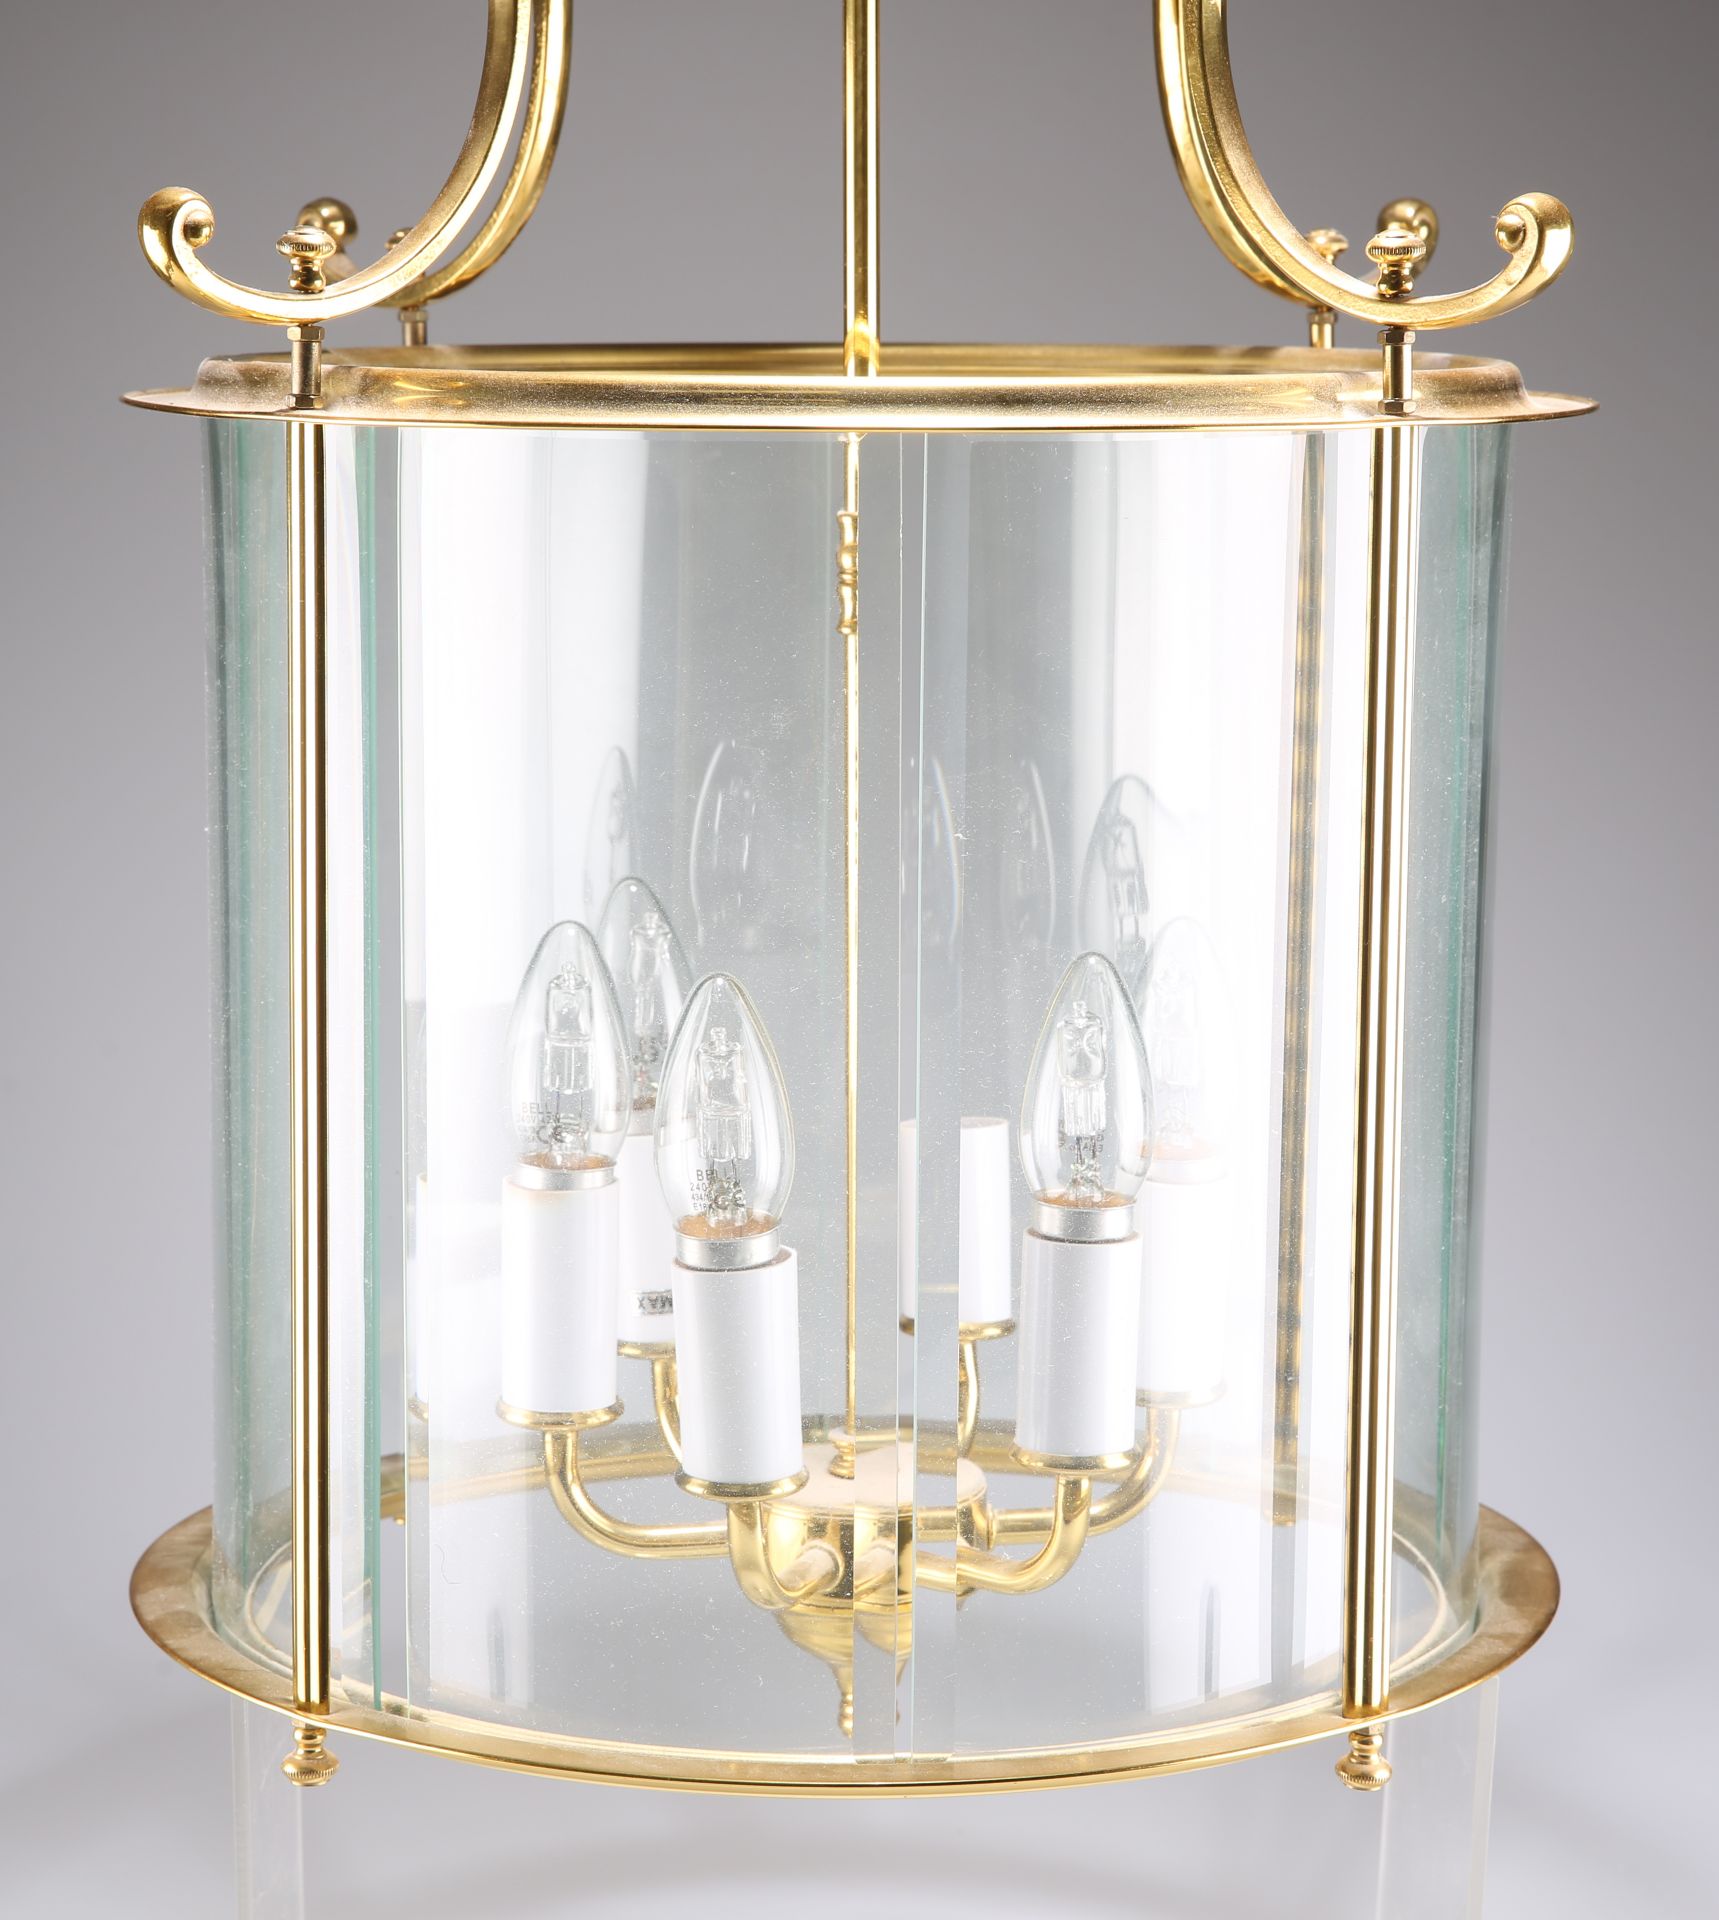 A LARGE PERIOD STYLE BRASS LANTERN - Image 2 of 2